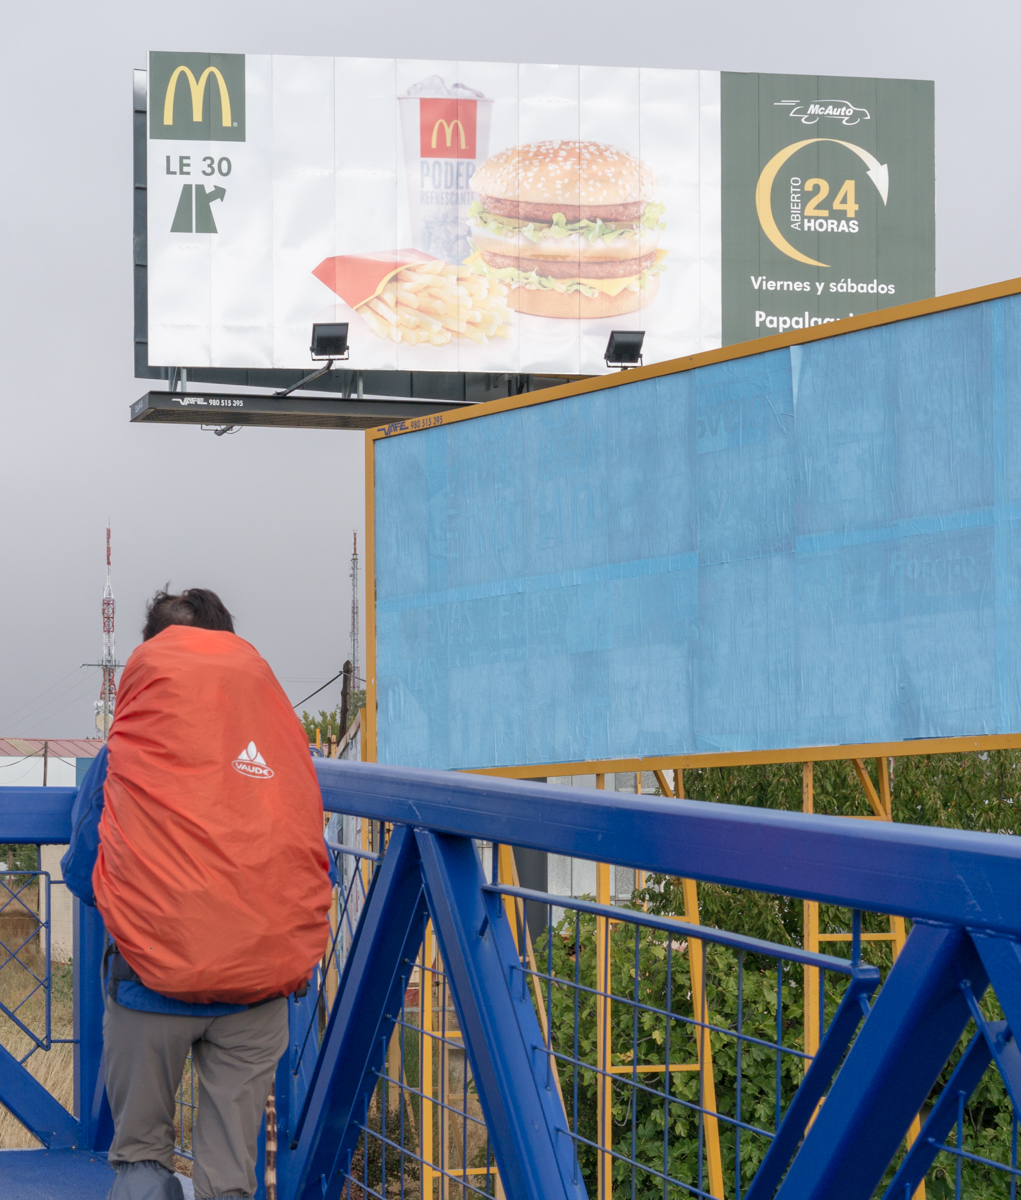 A pilgrim confronts a McDonald's billboard on the Camino Frances in Valdelafuente, an eastern suburb of Leon, Spain | Photo by Mike Hudak